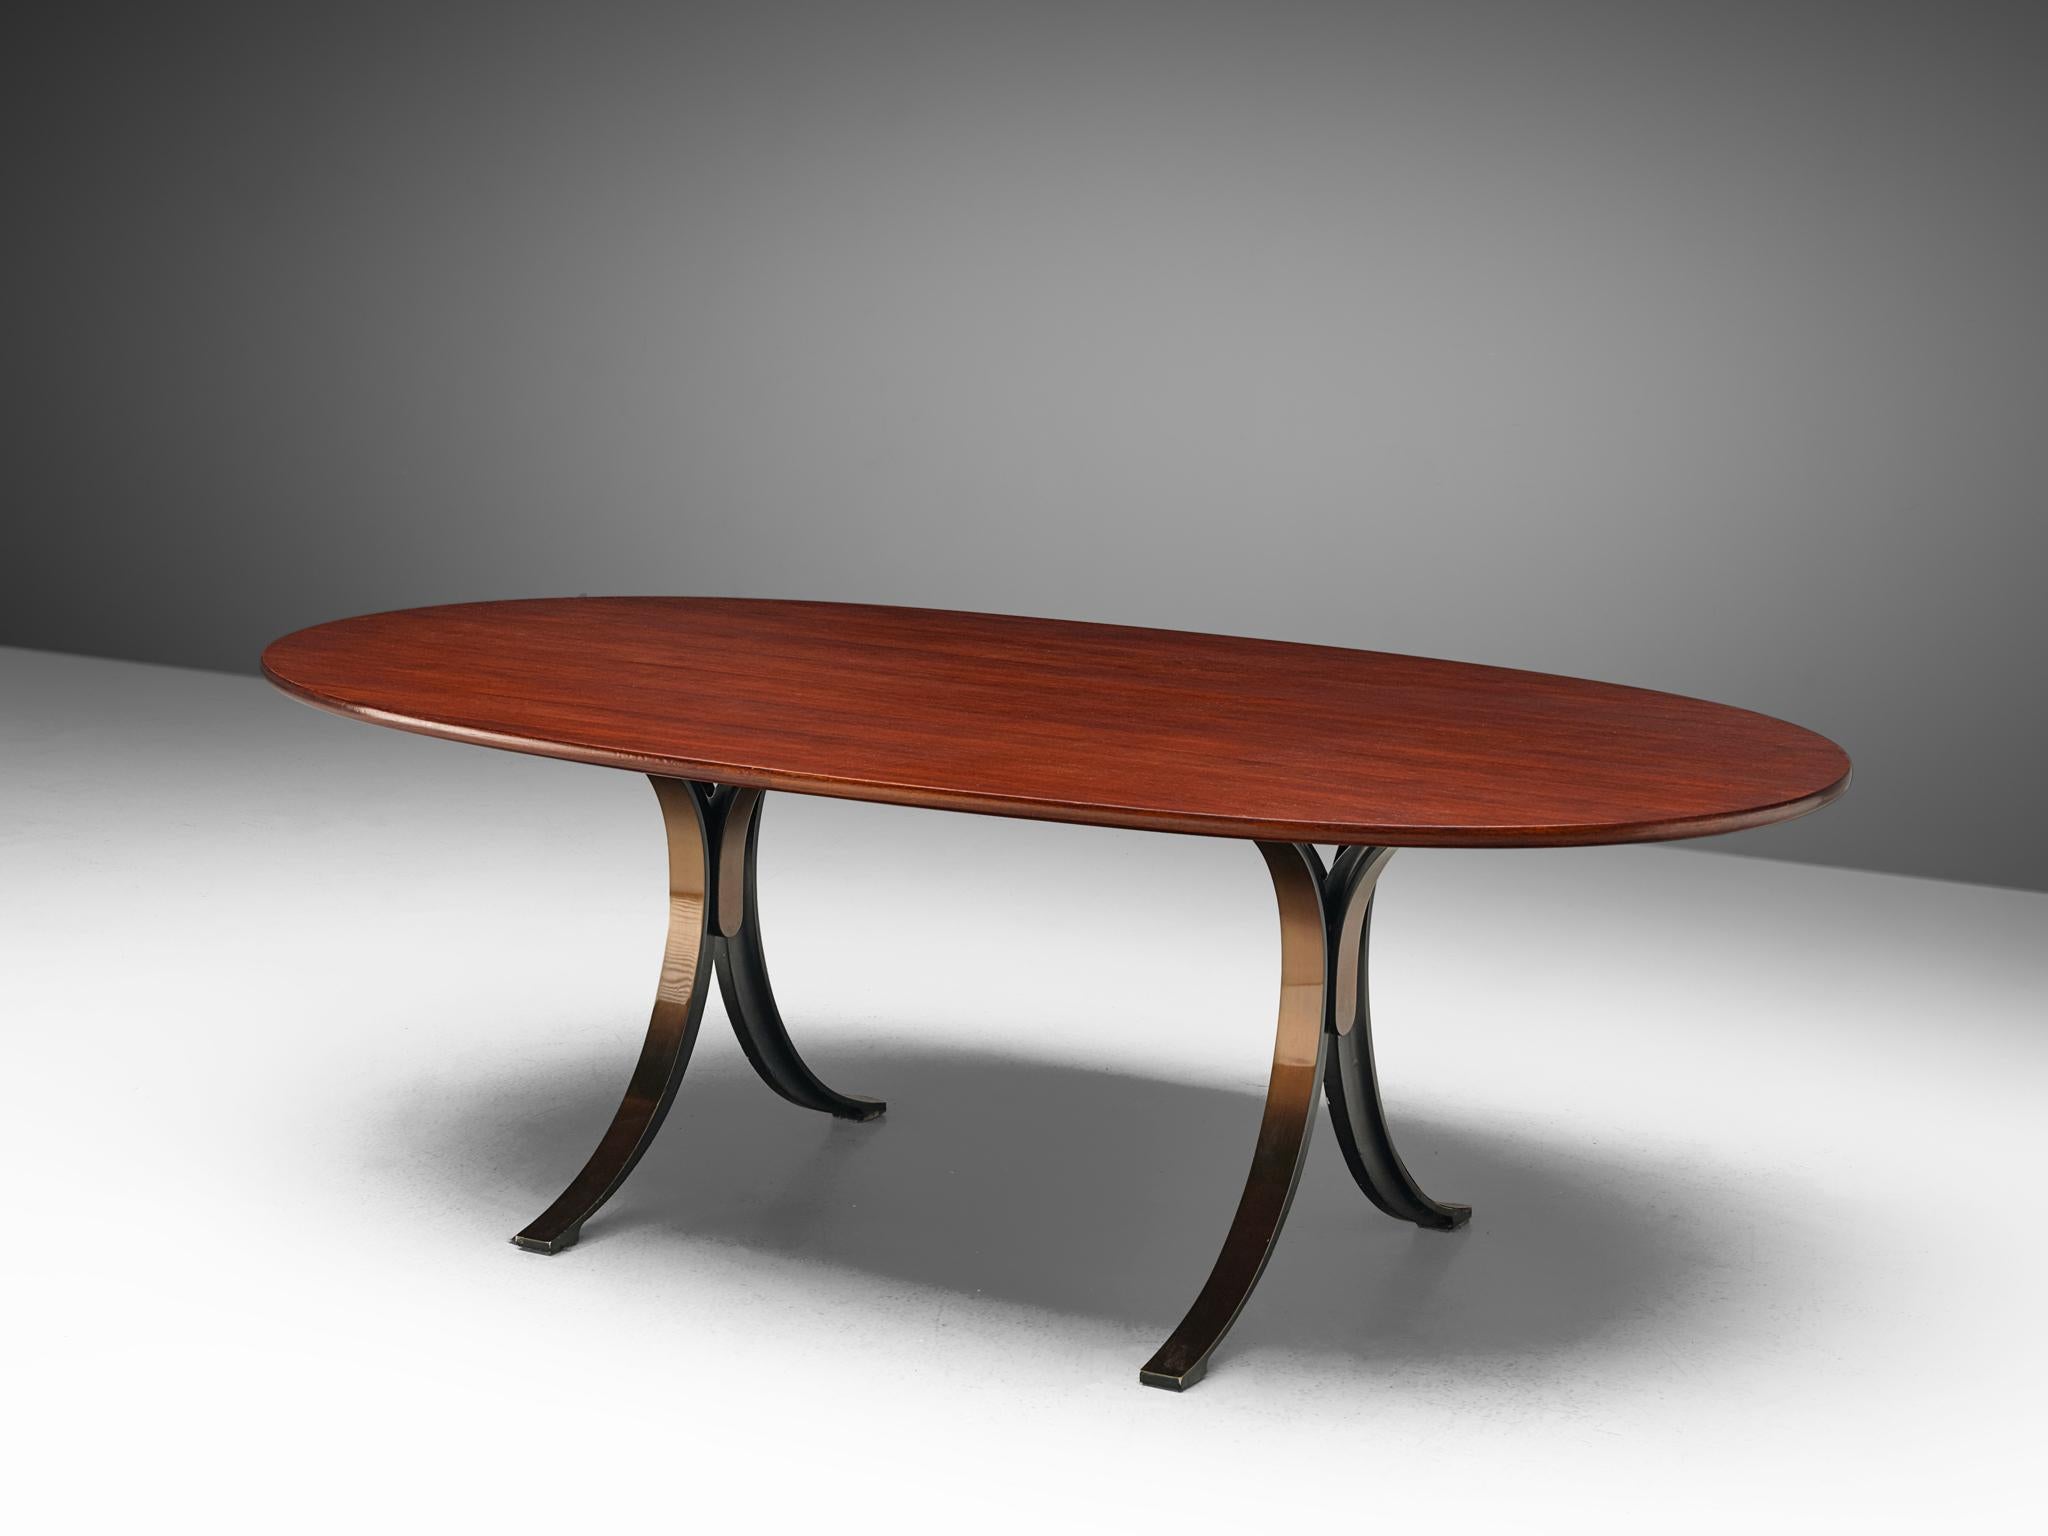 Osvaldo Borsani and Eugenio Gerli for Tecno, dining or conference table, model T102, teak, enameled steel, Italy, 1964. 

The designers Borsani and Gerli created an outstanding piece of furniture together that deserves a prominent place in one's